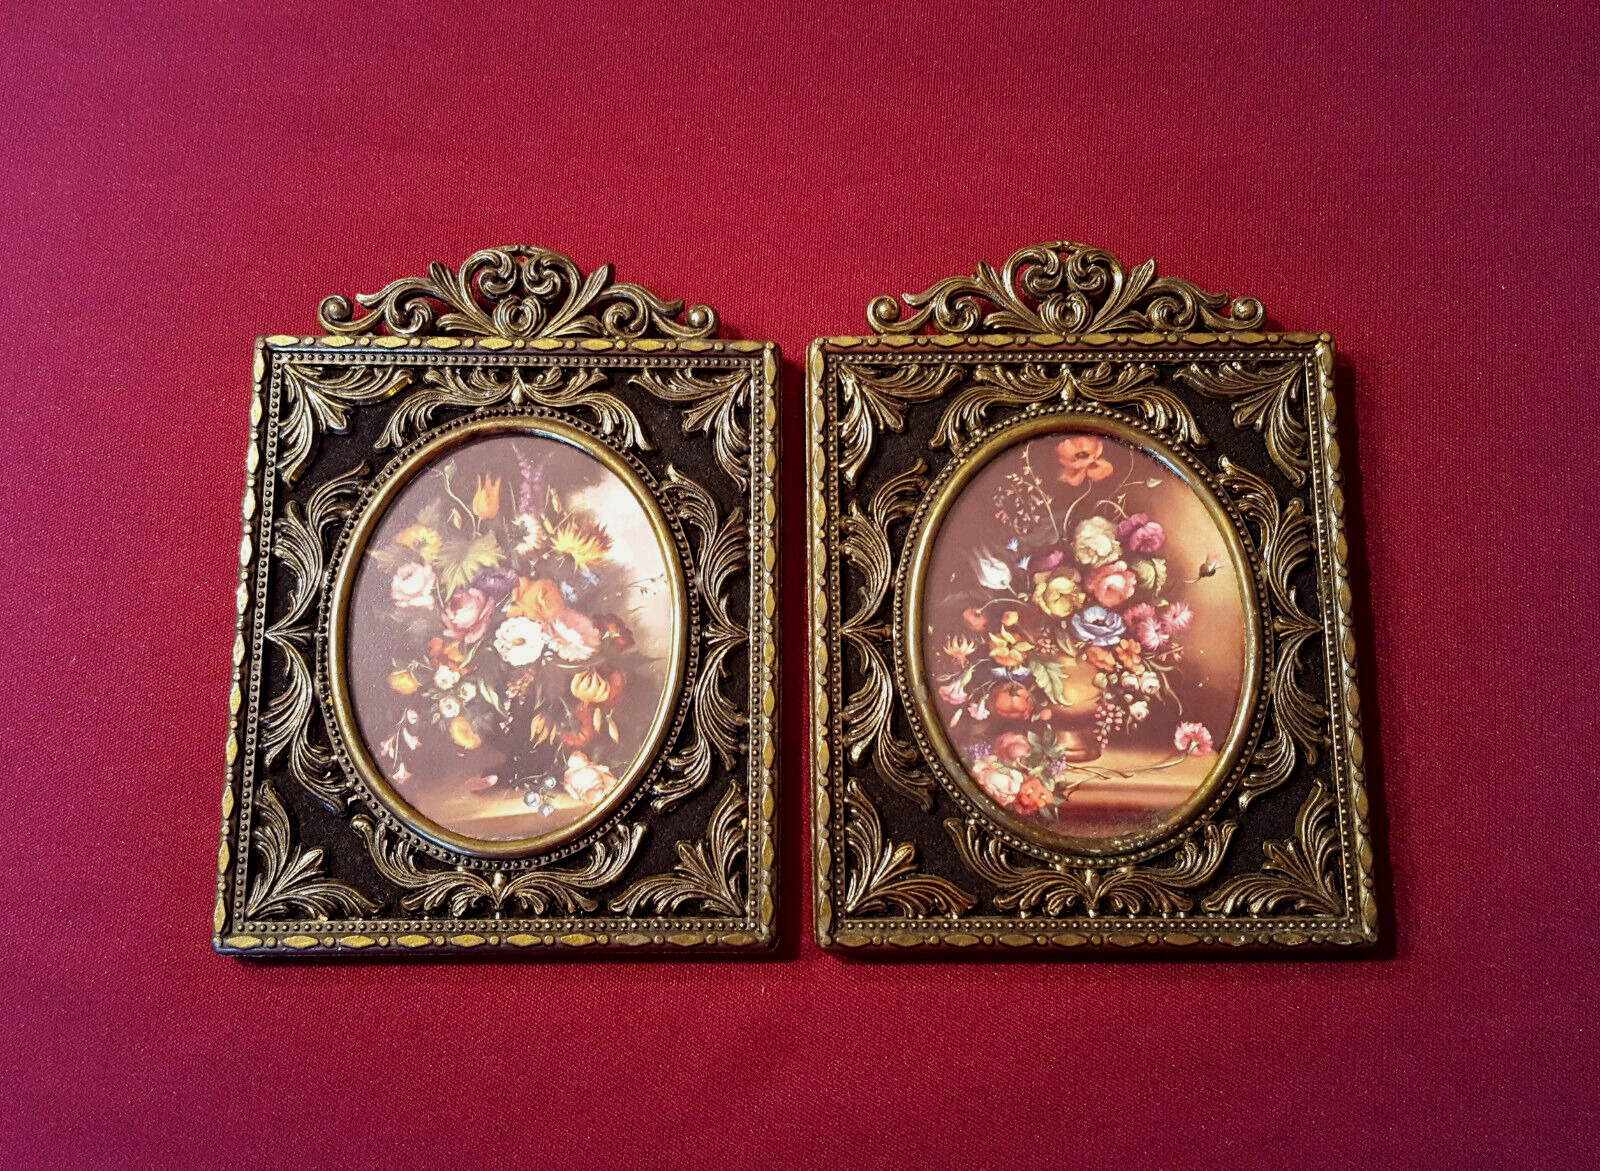 Vintage Set of Italian Ornate Metal Pictures with Floral Still Life